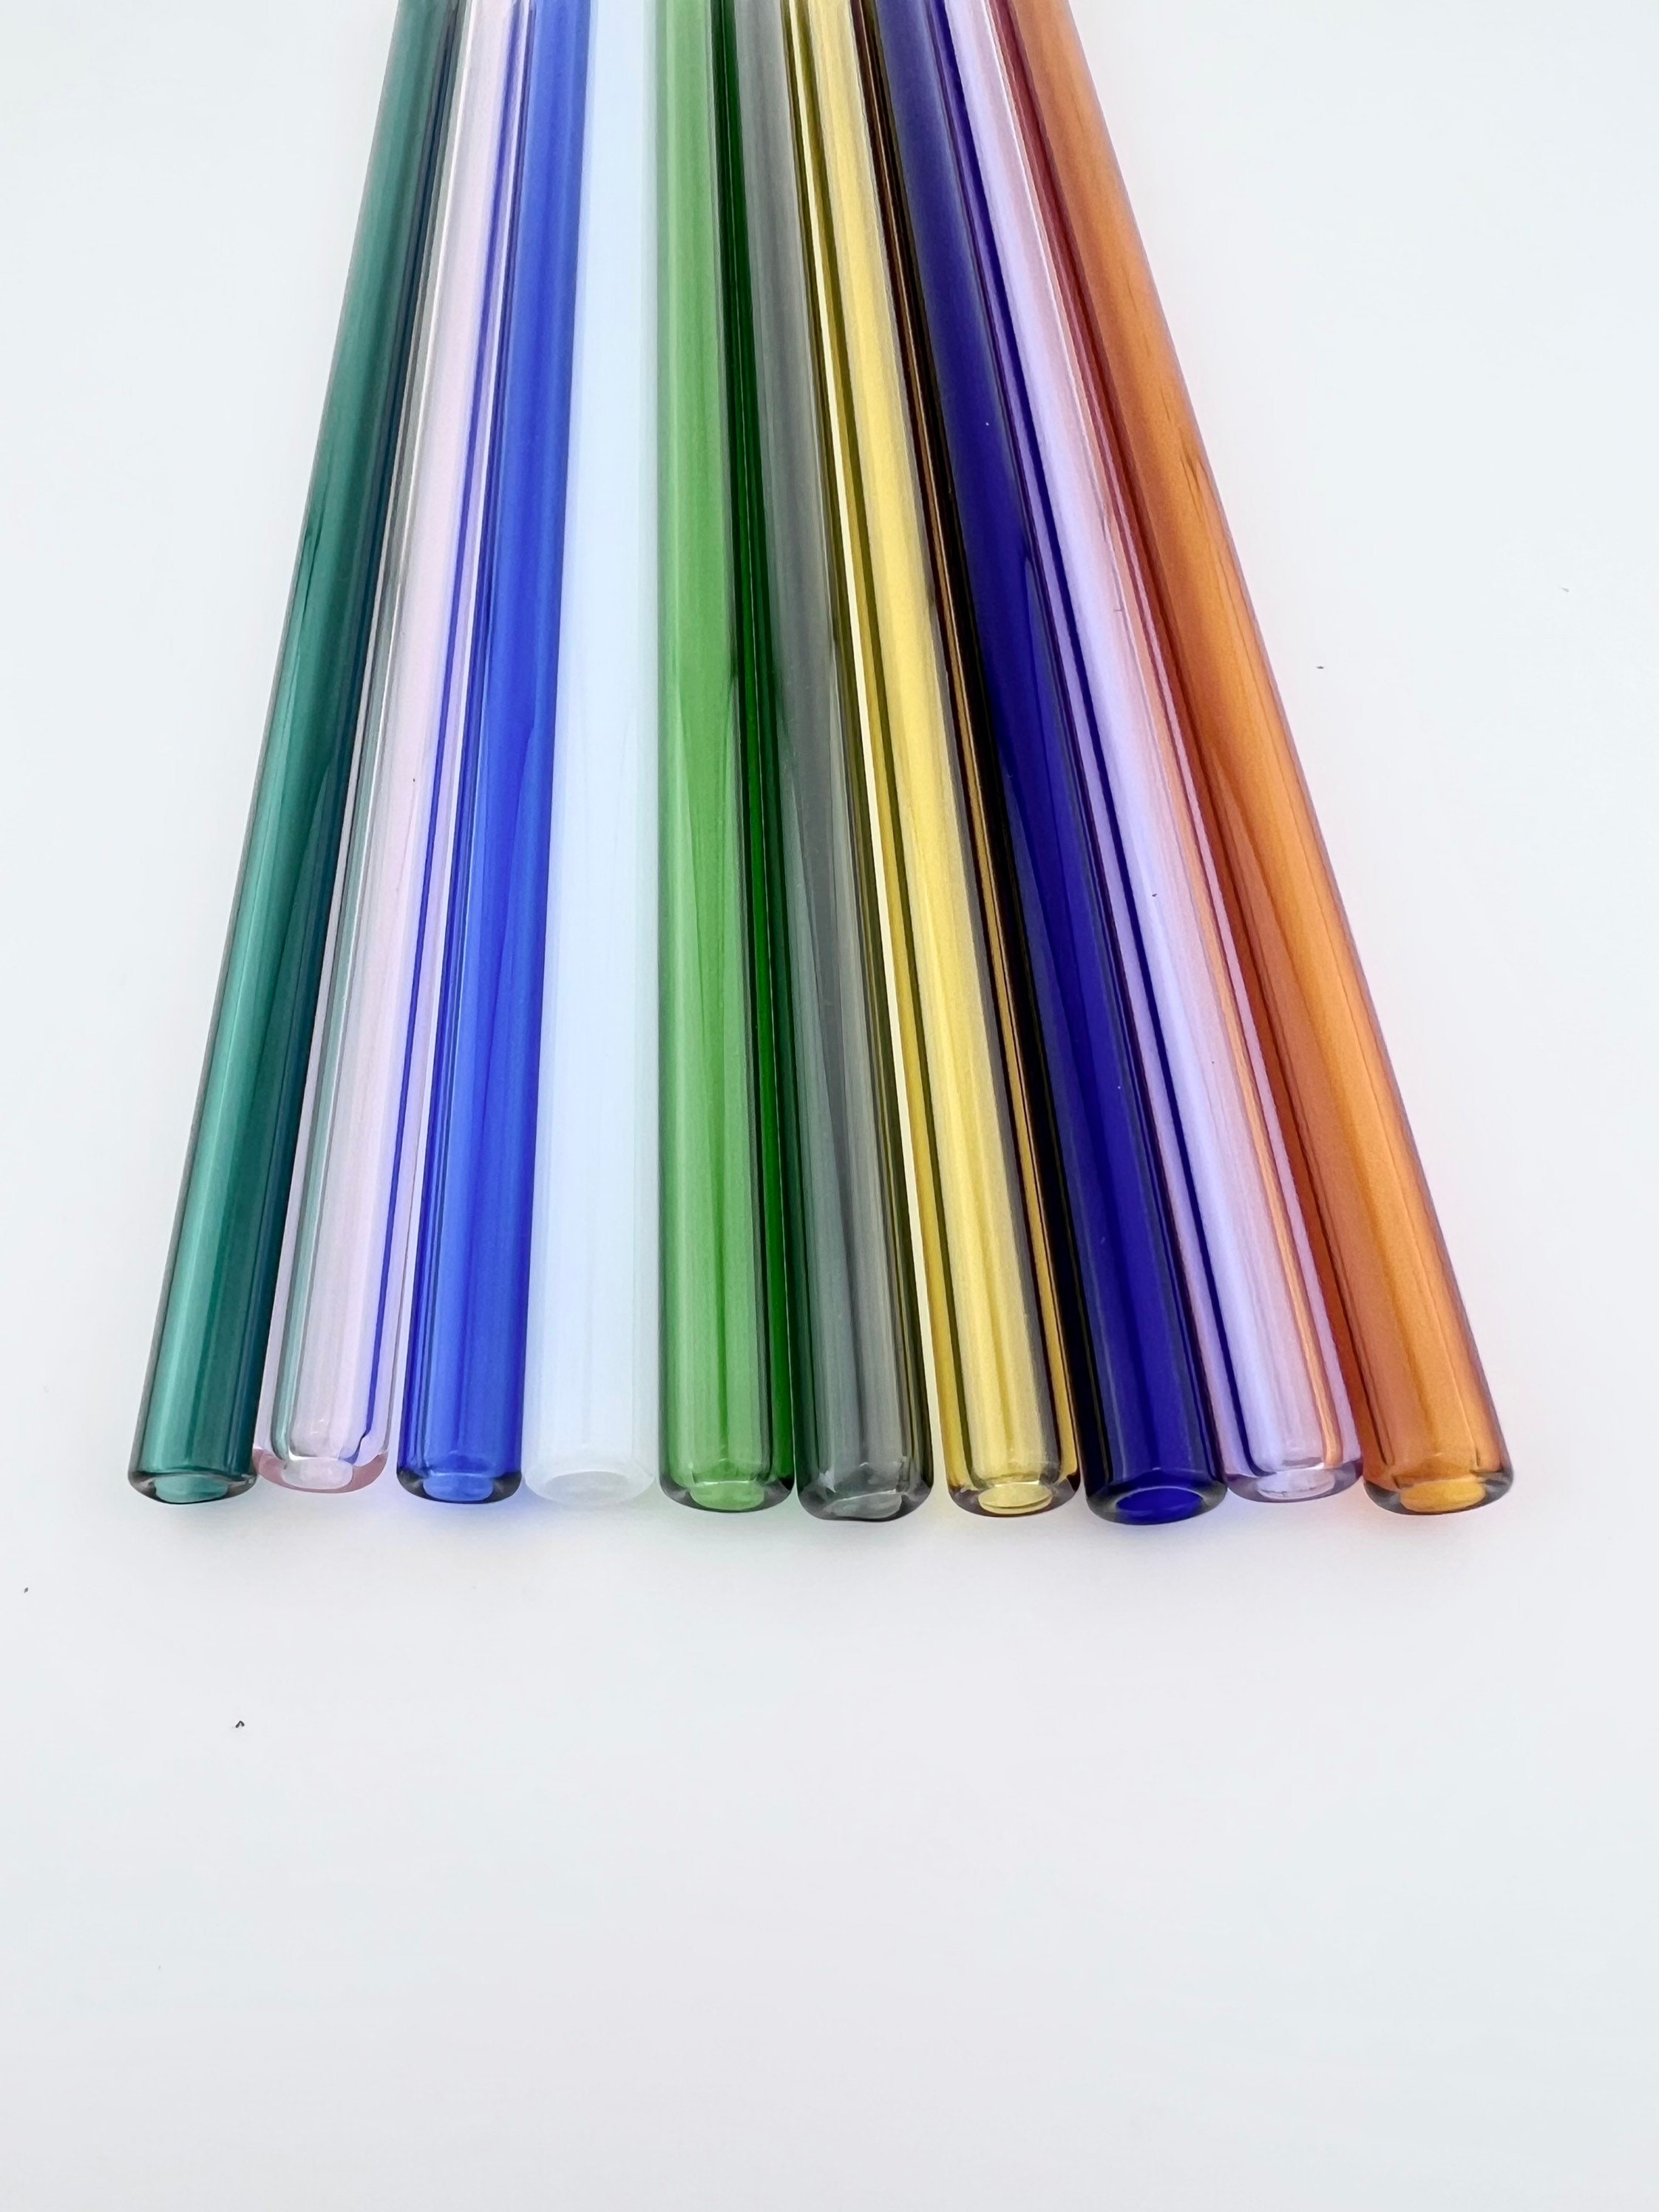 4/8 Bent Glass Straws (10 color) Reusable Drinking Straw for